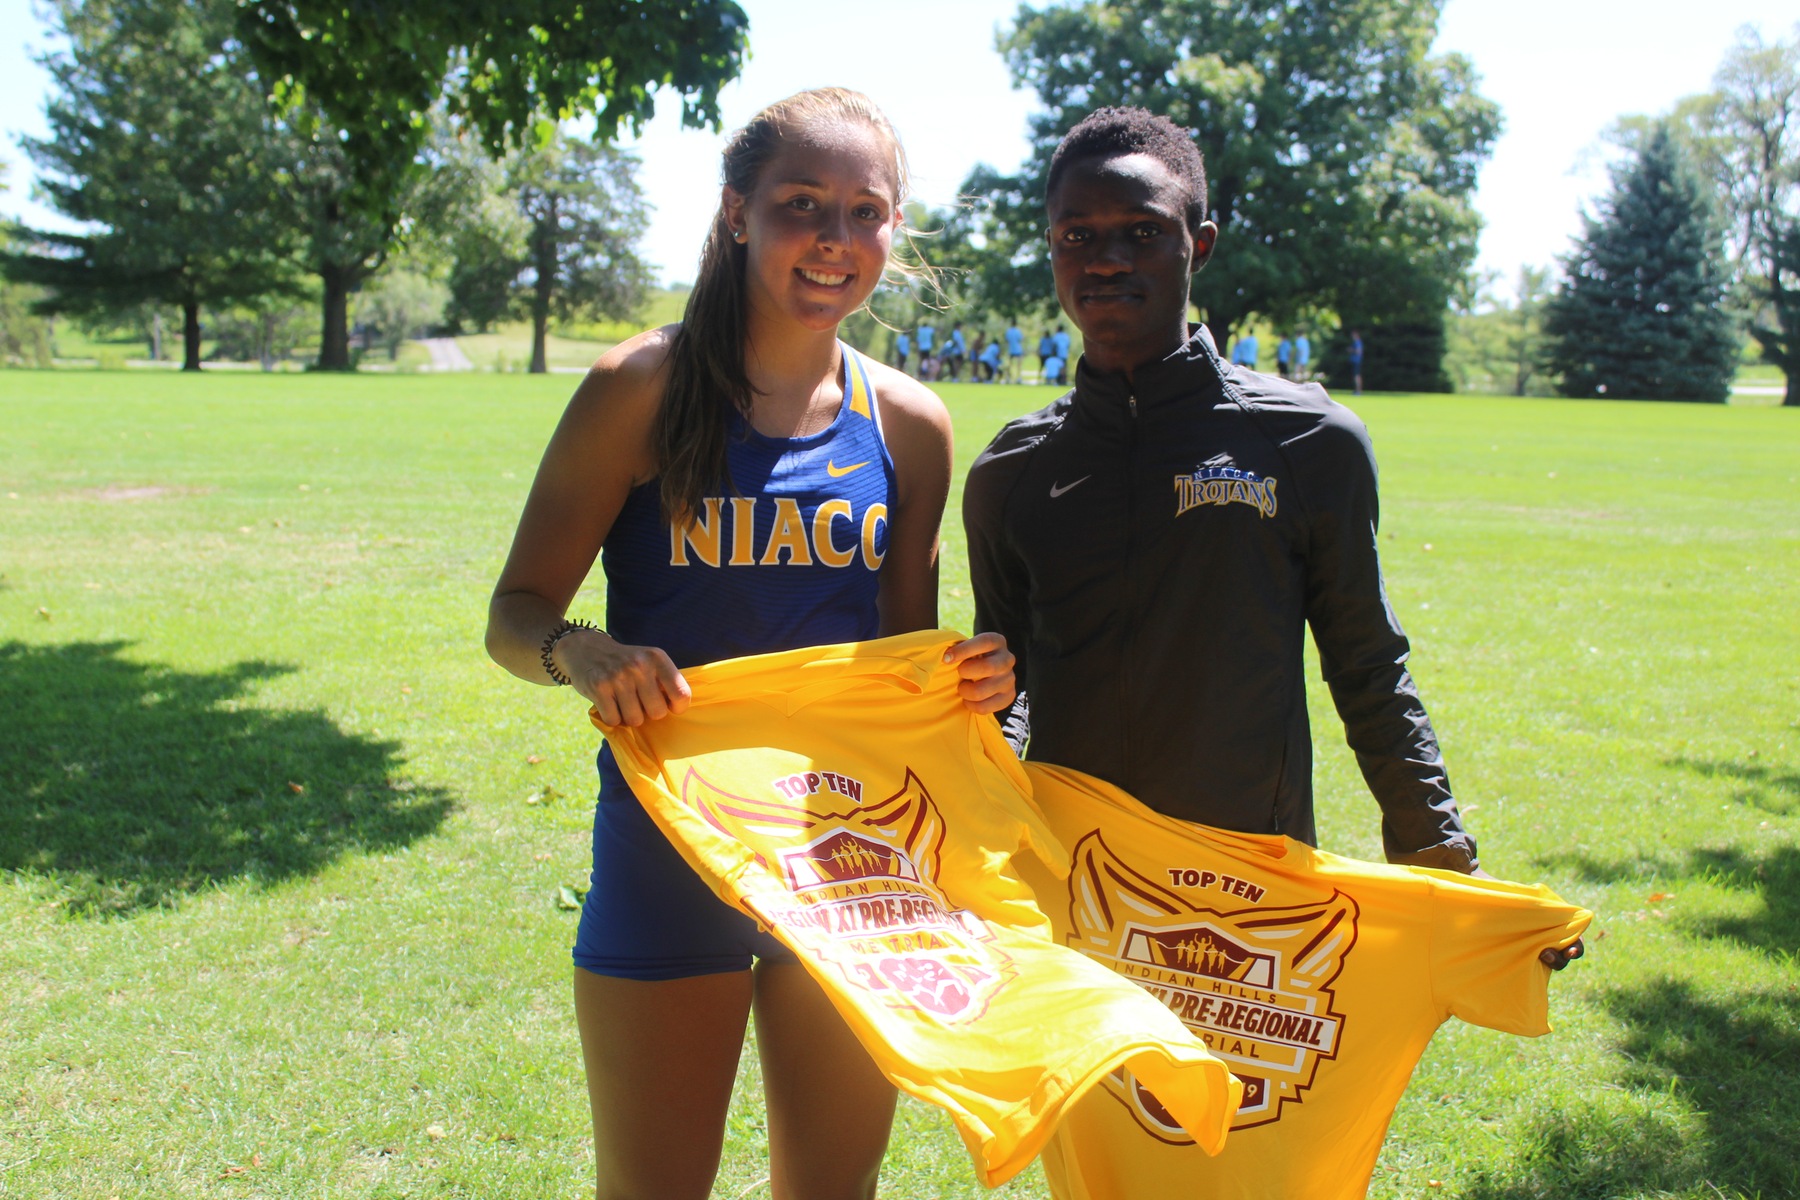 NIACC's Whitney Martin and Janvier Irakoze both placed in the top 10 at Friday's regional time trial in Ottumwa.